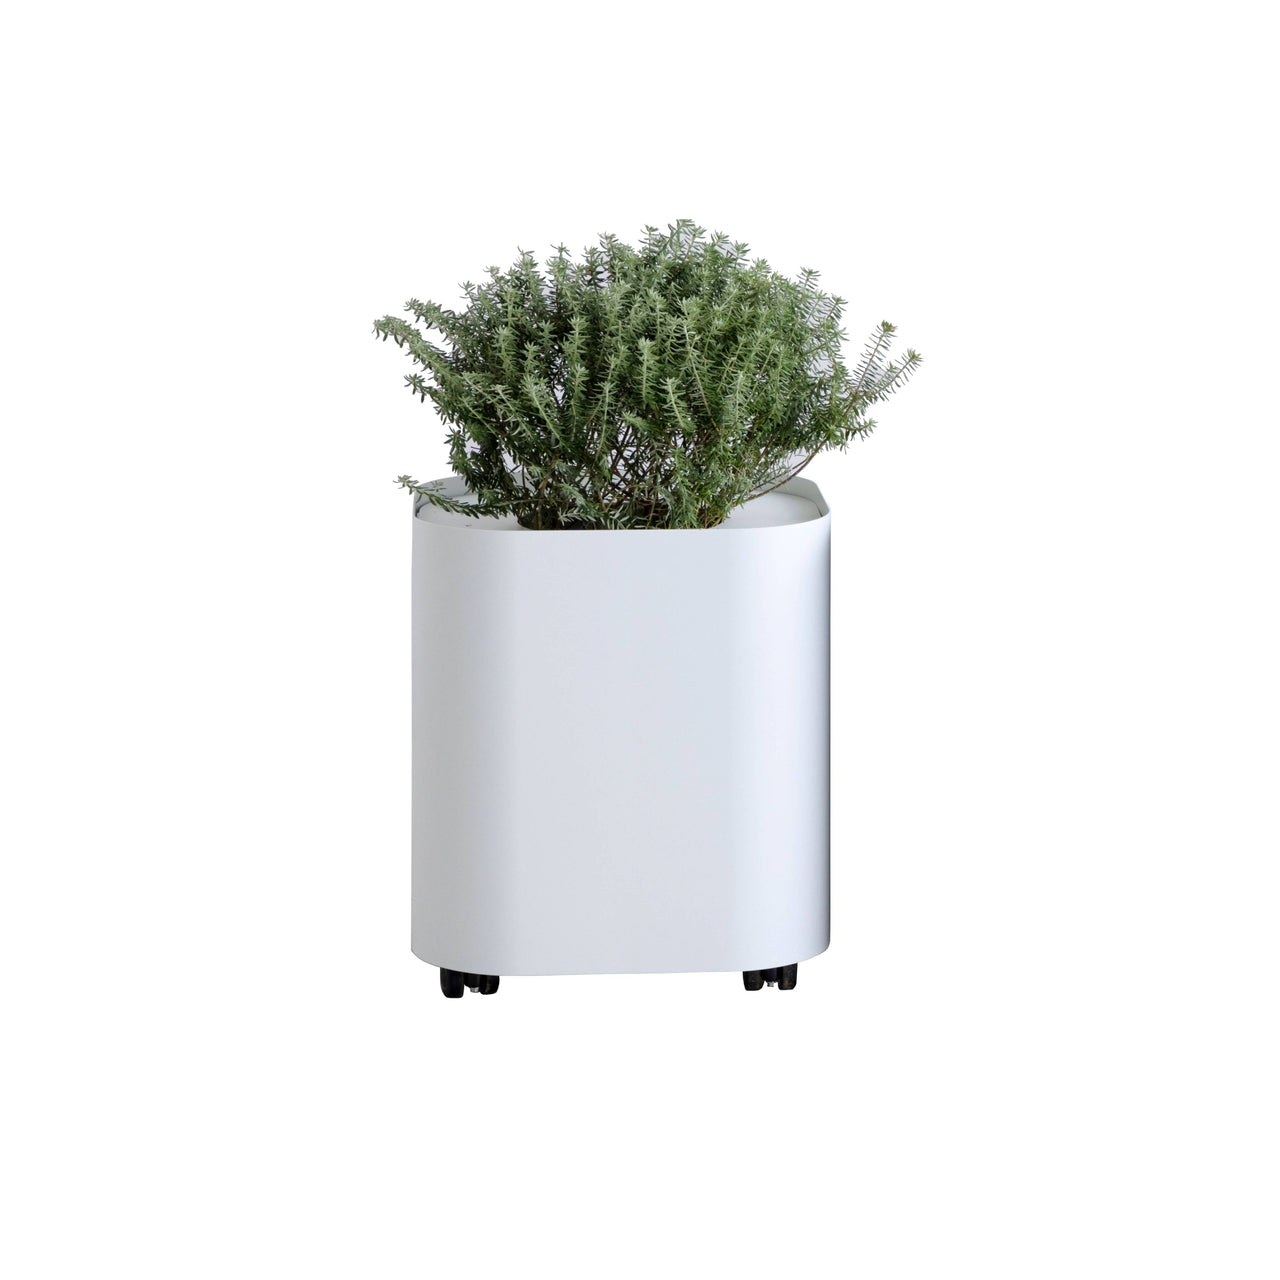 Loaf Planter: Outdoor + White